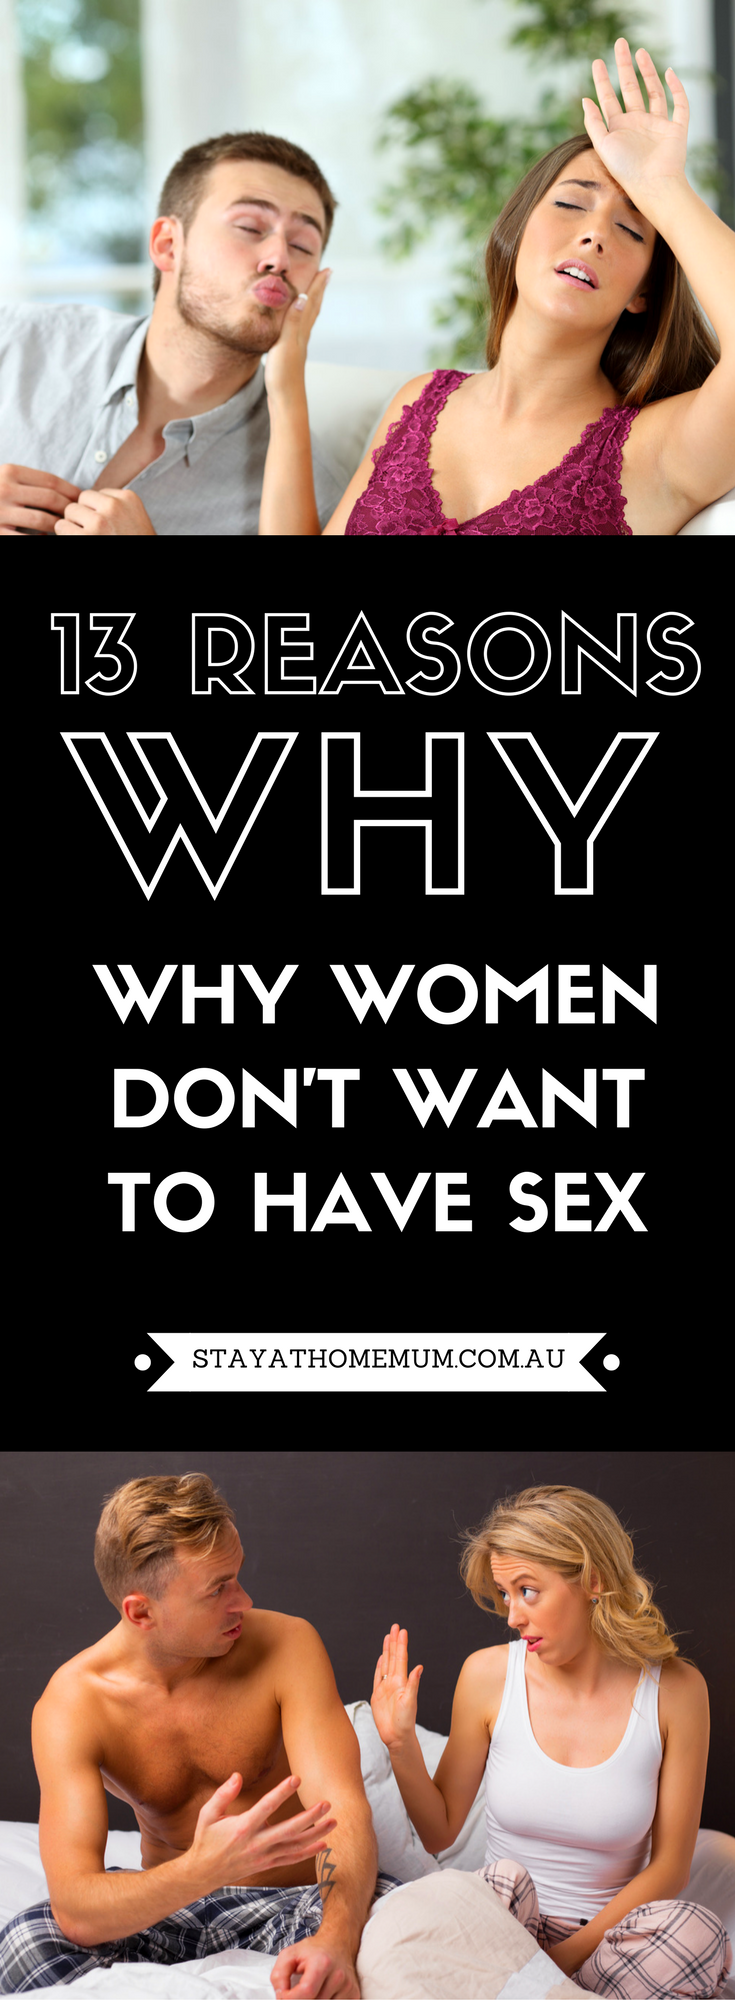 Women Want To Have Sex 21